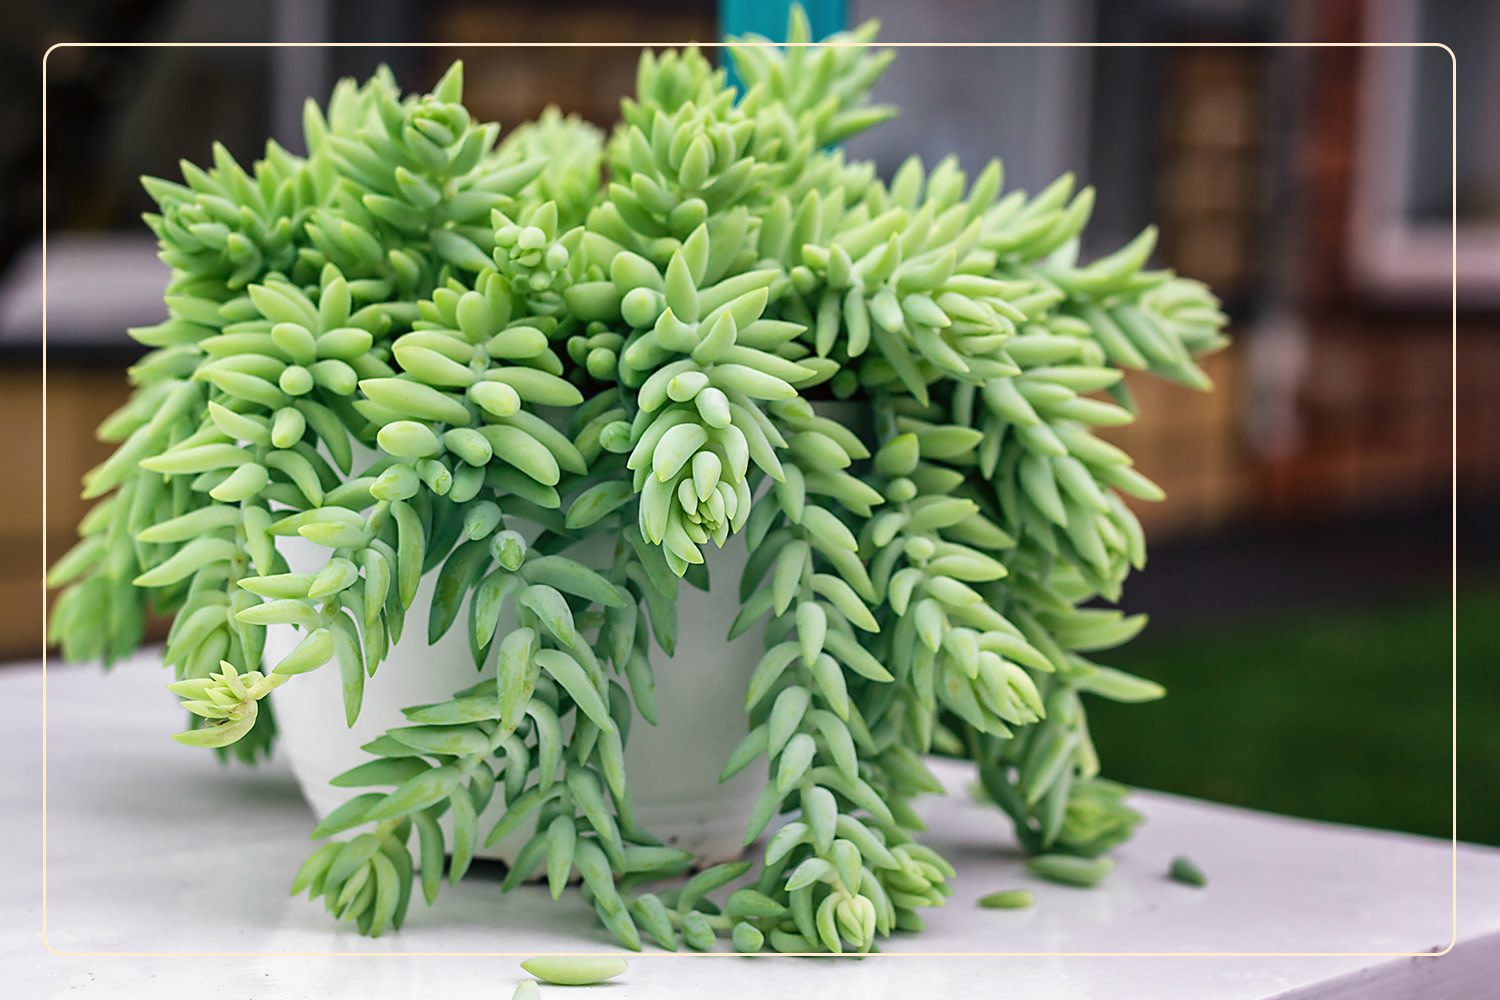 a Burros Tail (Sedum morganianum), which is a pet-friendly succulent, overflows from its white planter